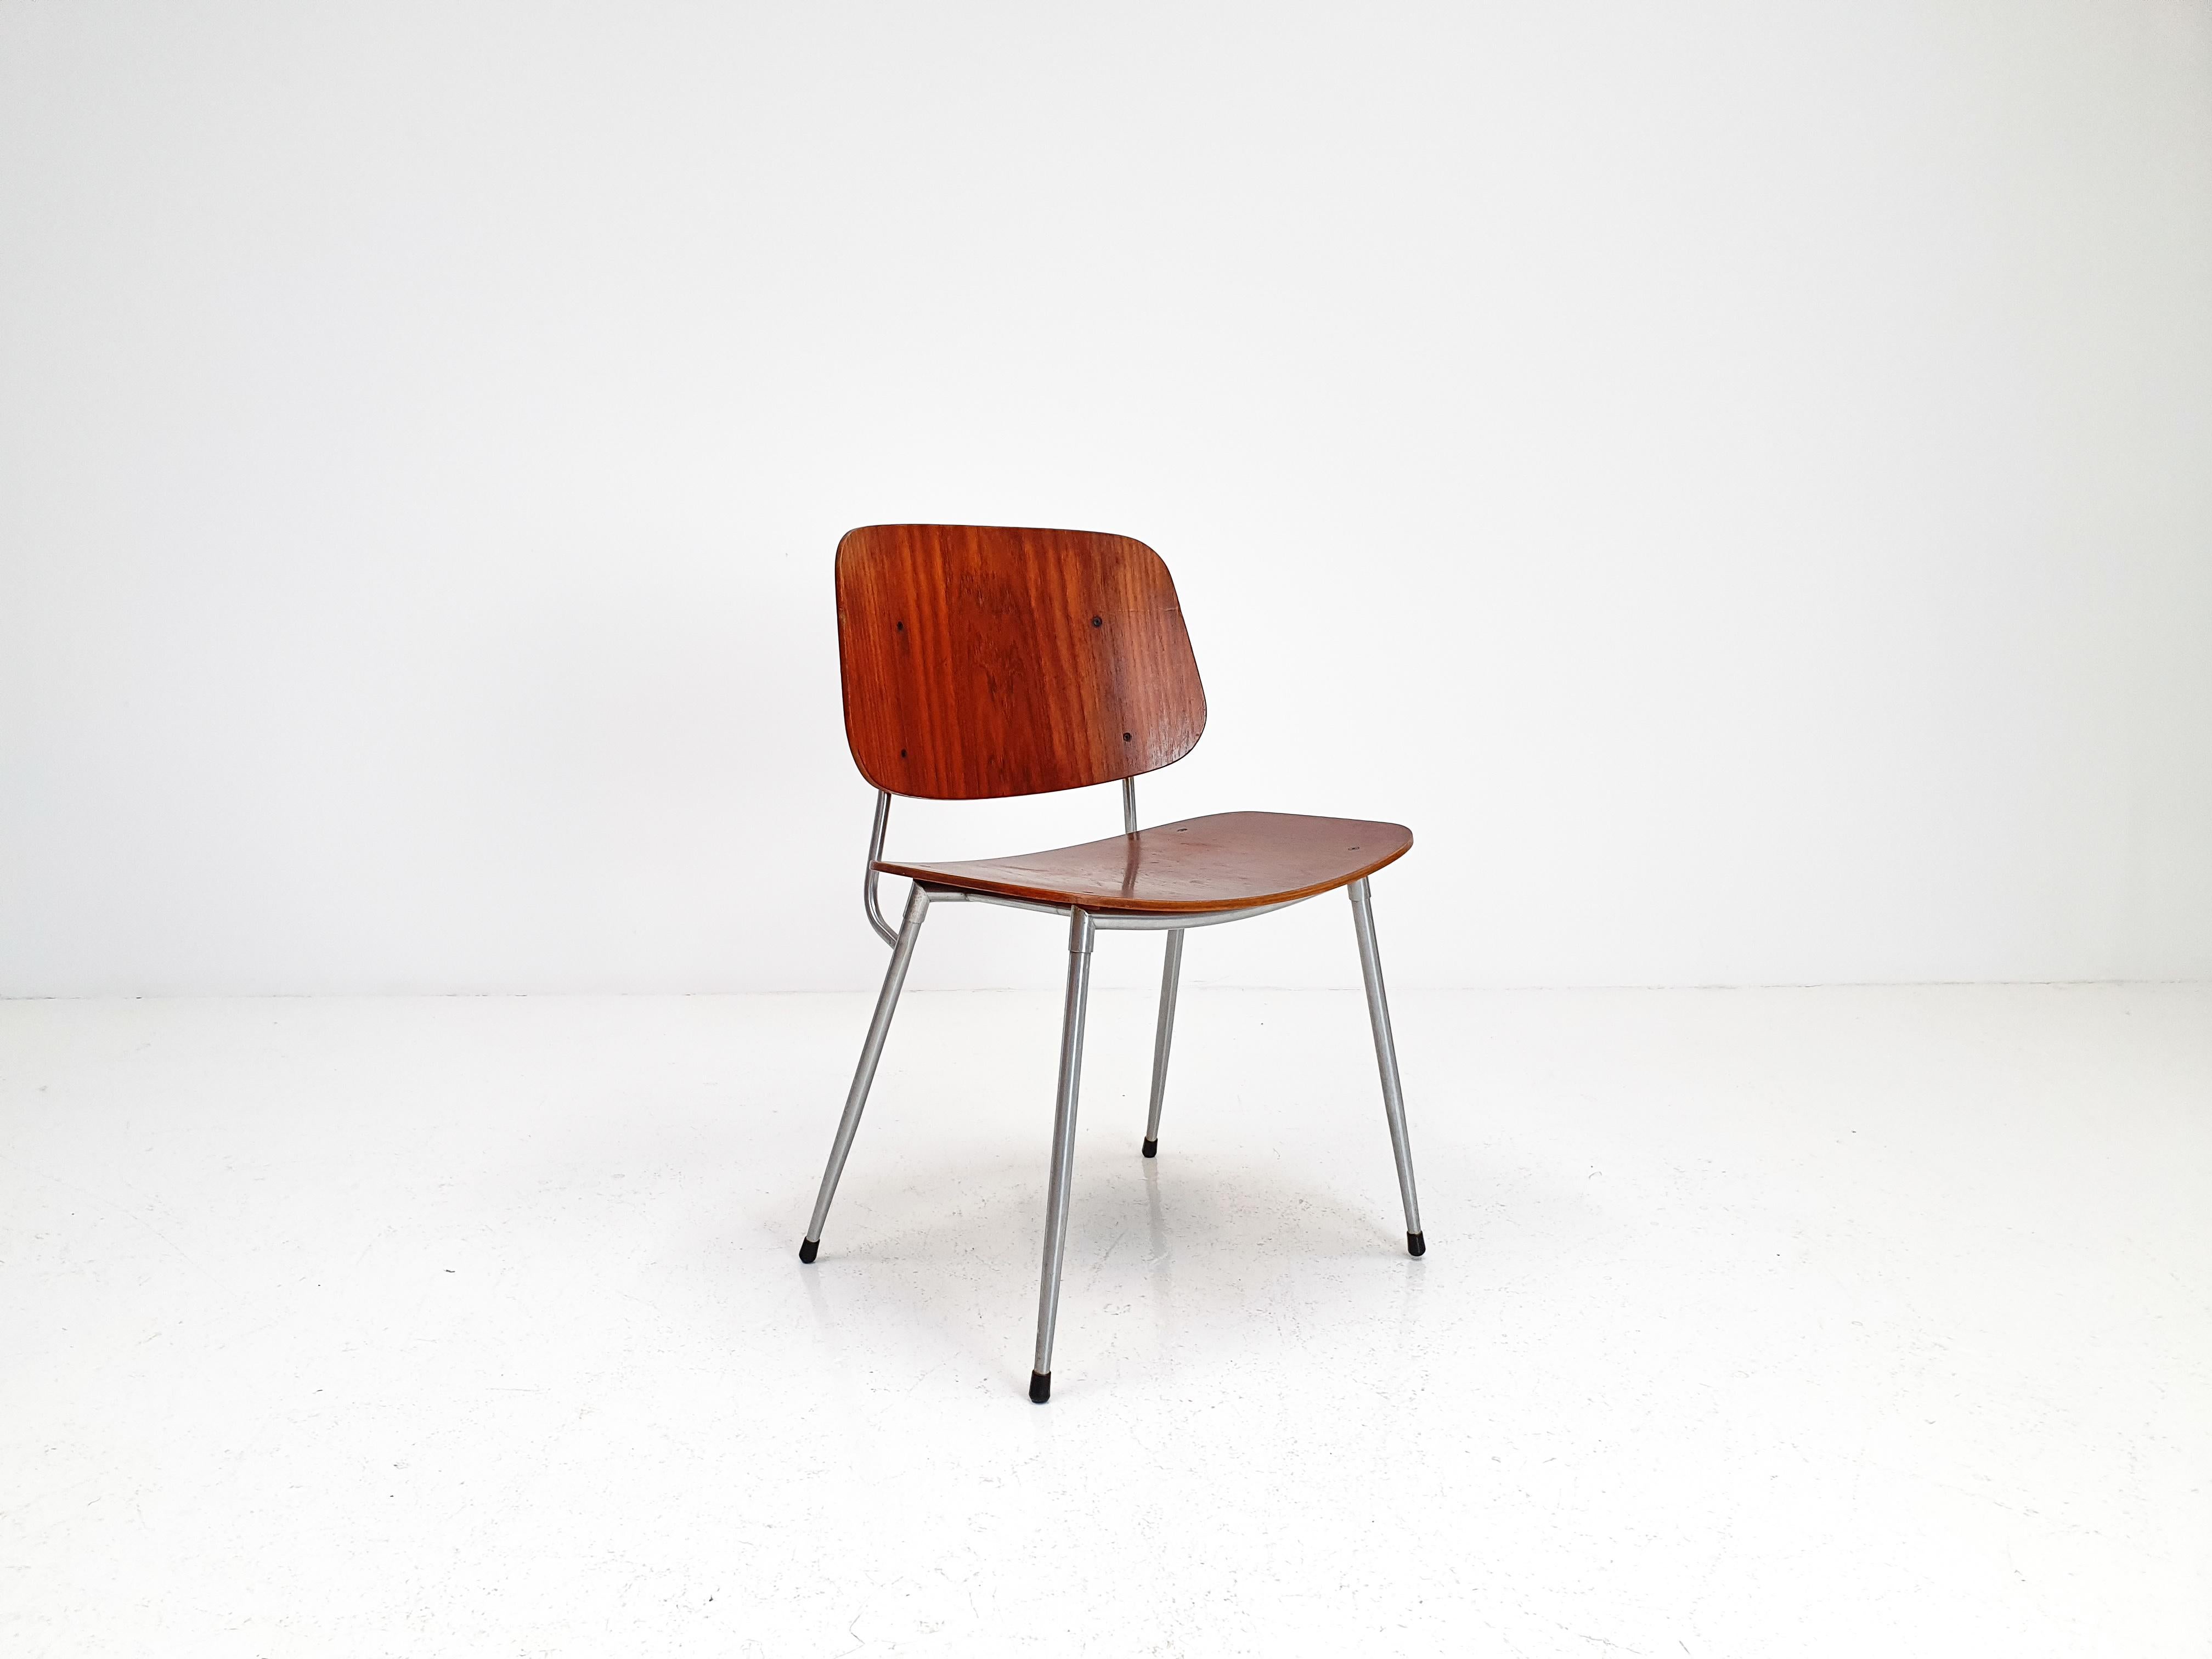 A plywood and steel chair by Børge Mogensen manufactured by Søborg Møbelfabrik, Denmark, 1953. 

In good original condition with minor wear consistent with age and use, we have not restored this piece so to preserve the wonderful patina. A rare